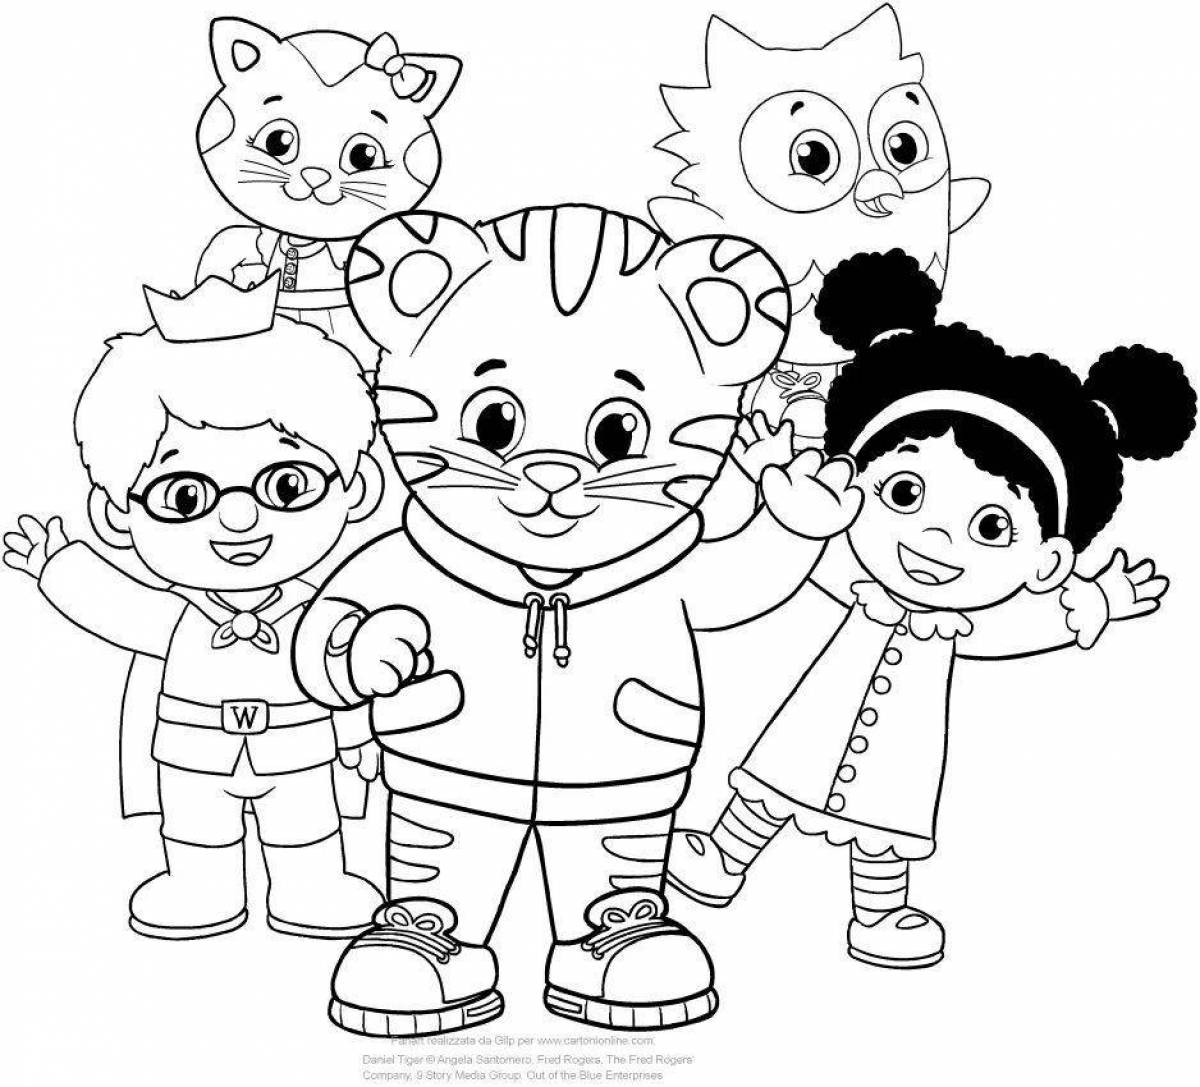 Coloring page graceful tiger family